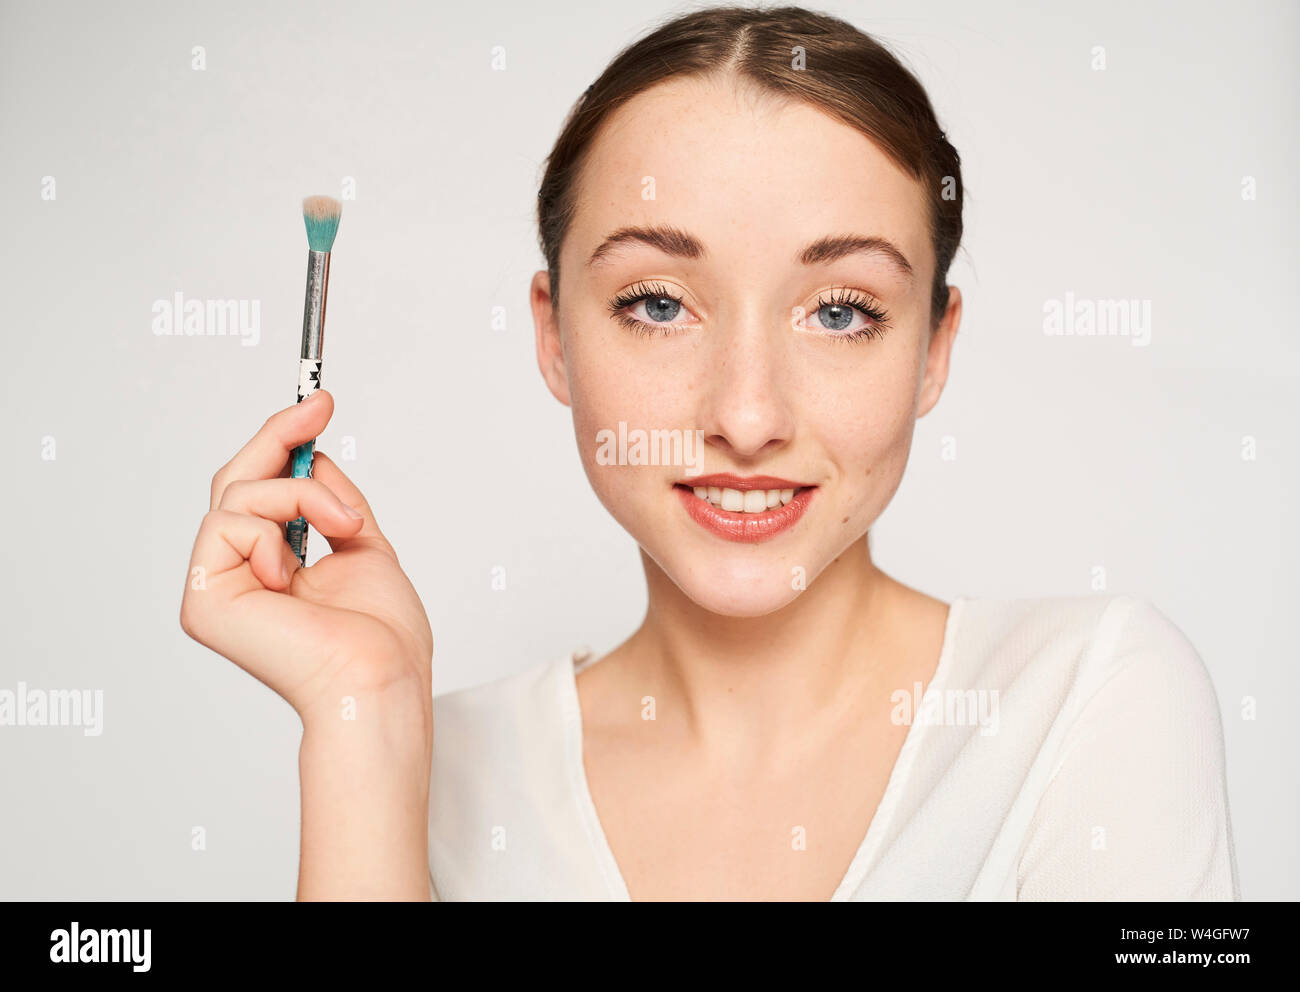 Portrait of smiling young woman with beauty brush Stock Photo